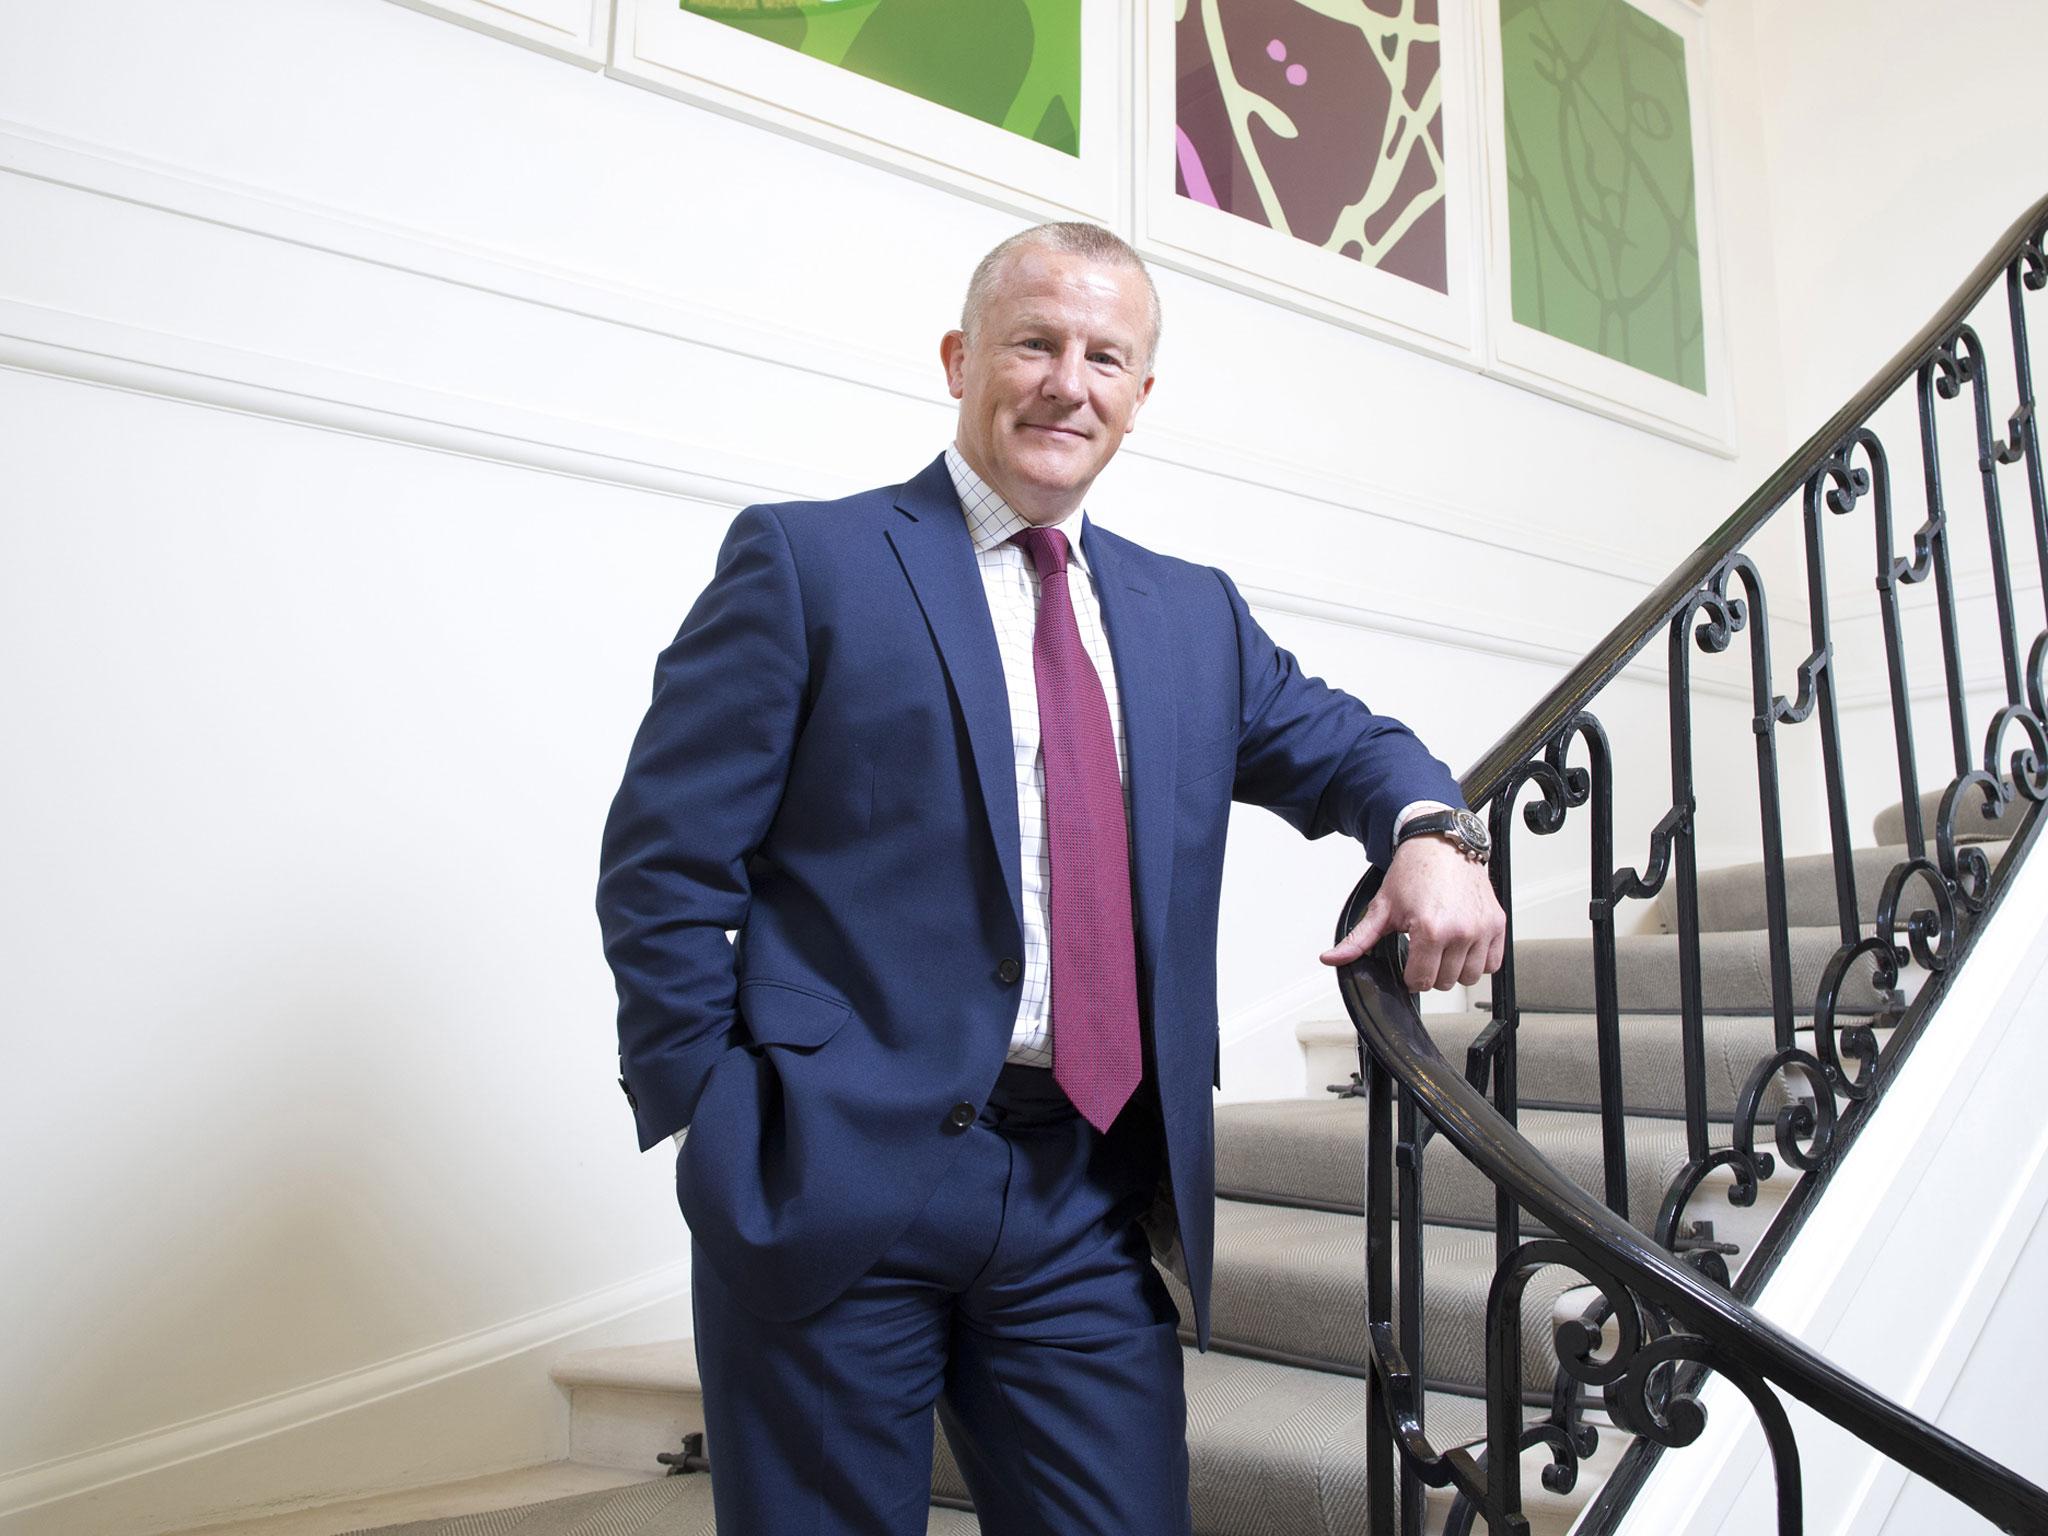 Neil Woodford's stellar reputation saw him raise well over £2bn from investors when he left Invesco Perpetual two years ago to set up his own firm